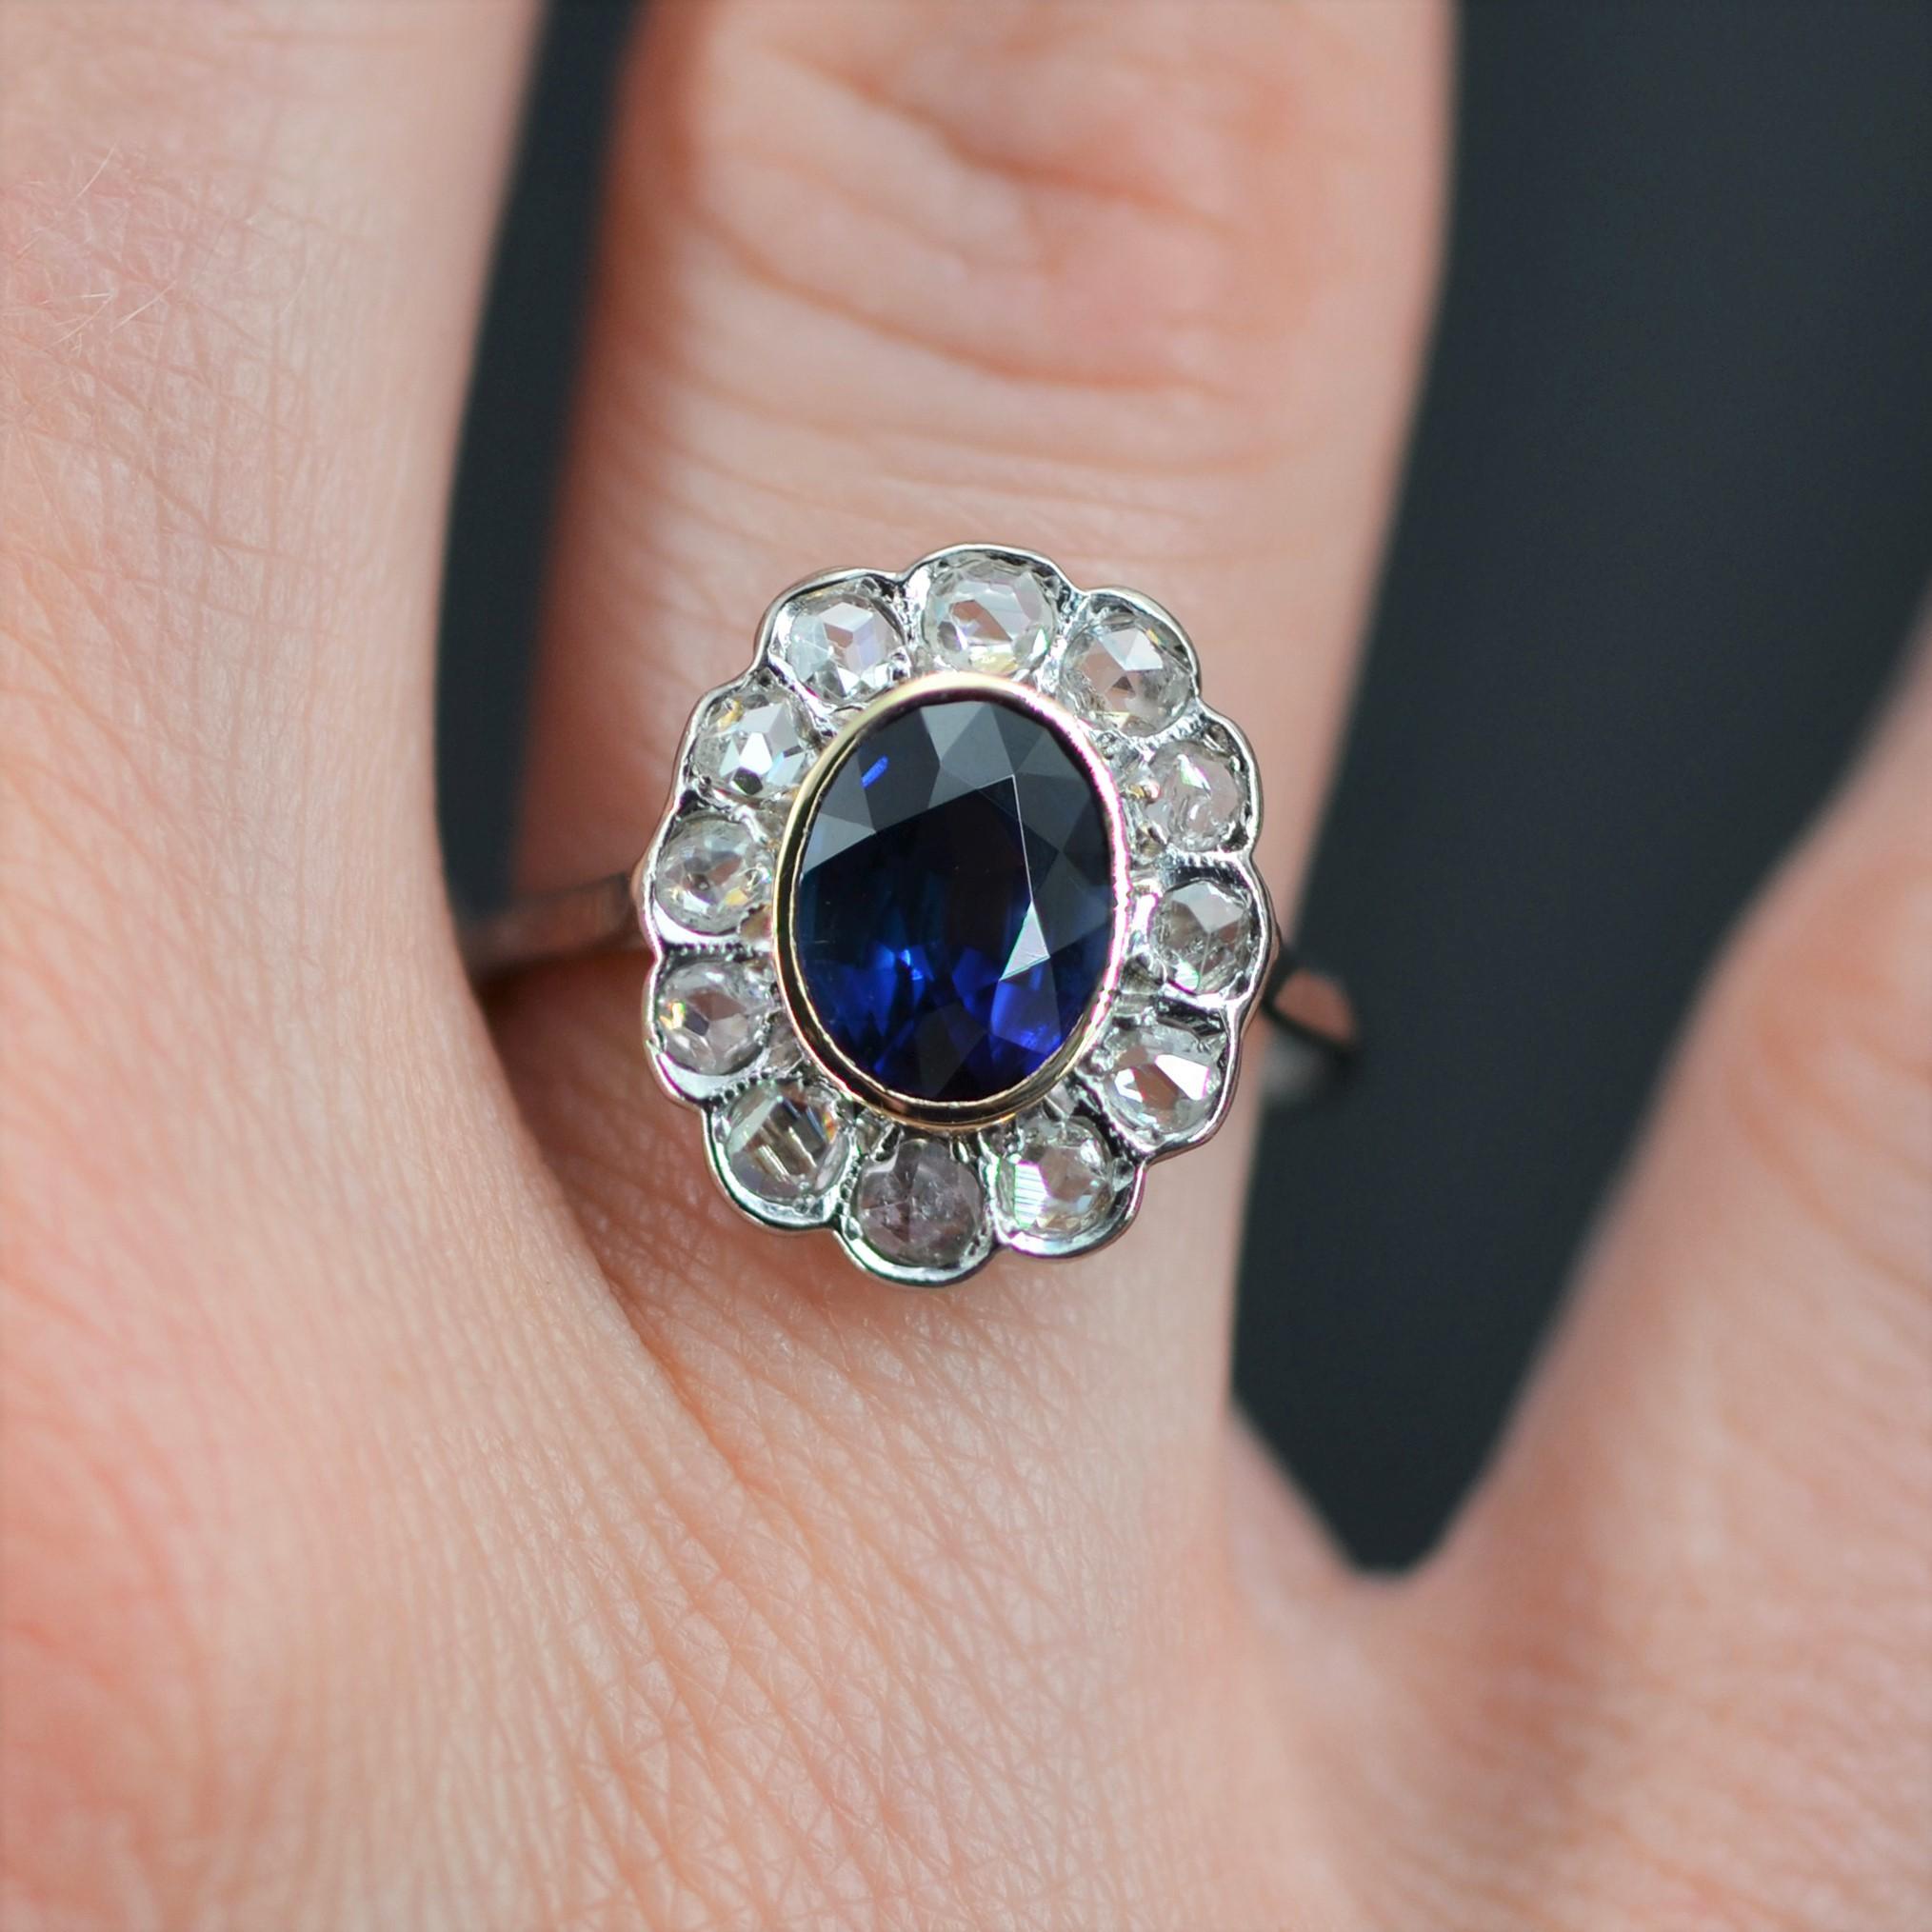 Oval Cut French 1930s Verneuil Sapphire Diamonds Platinum 18 Karat White Gold Ring